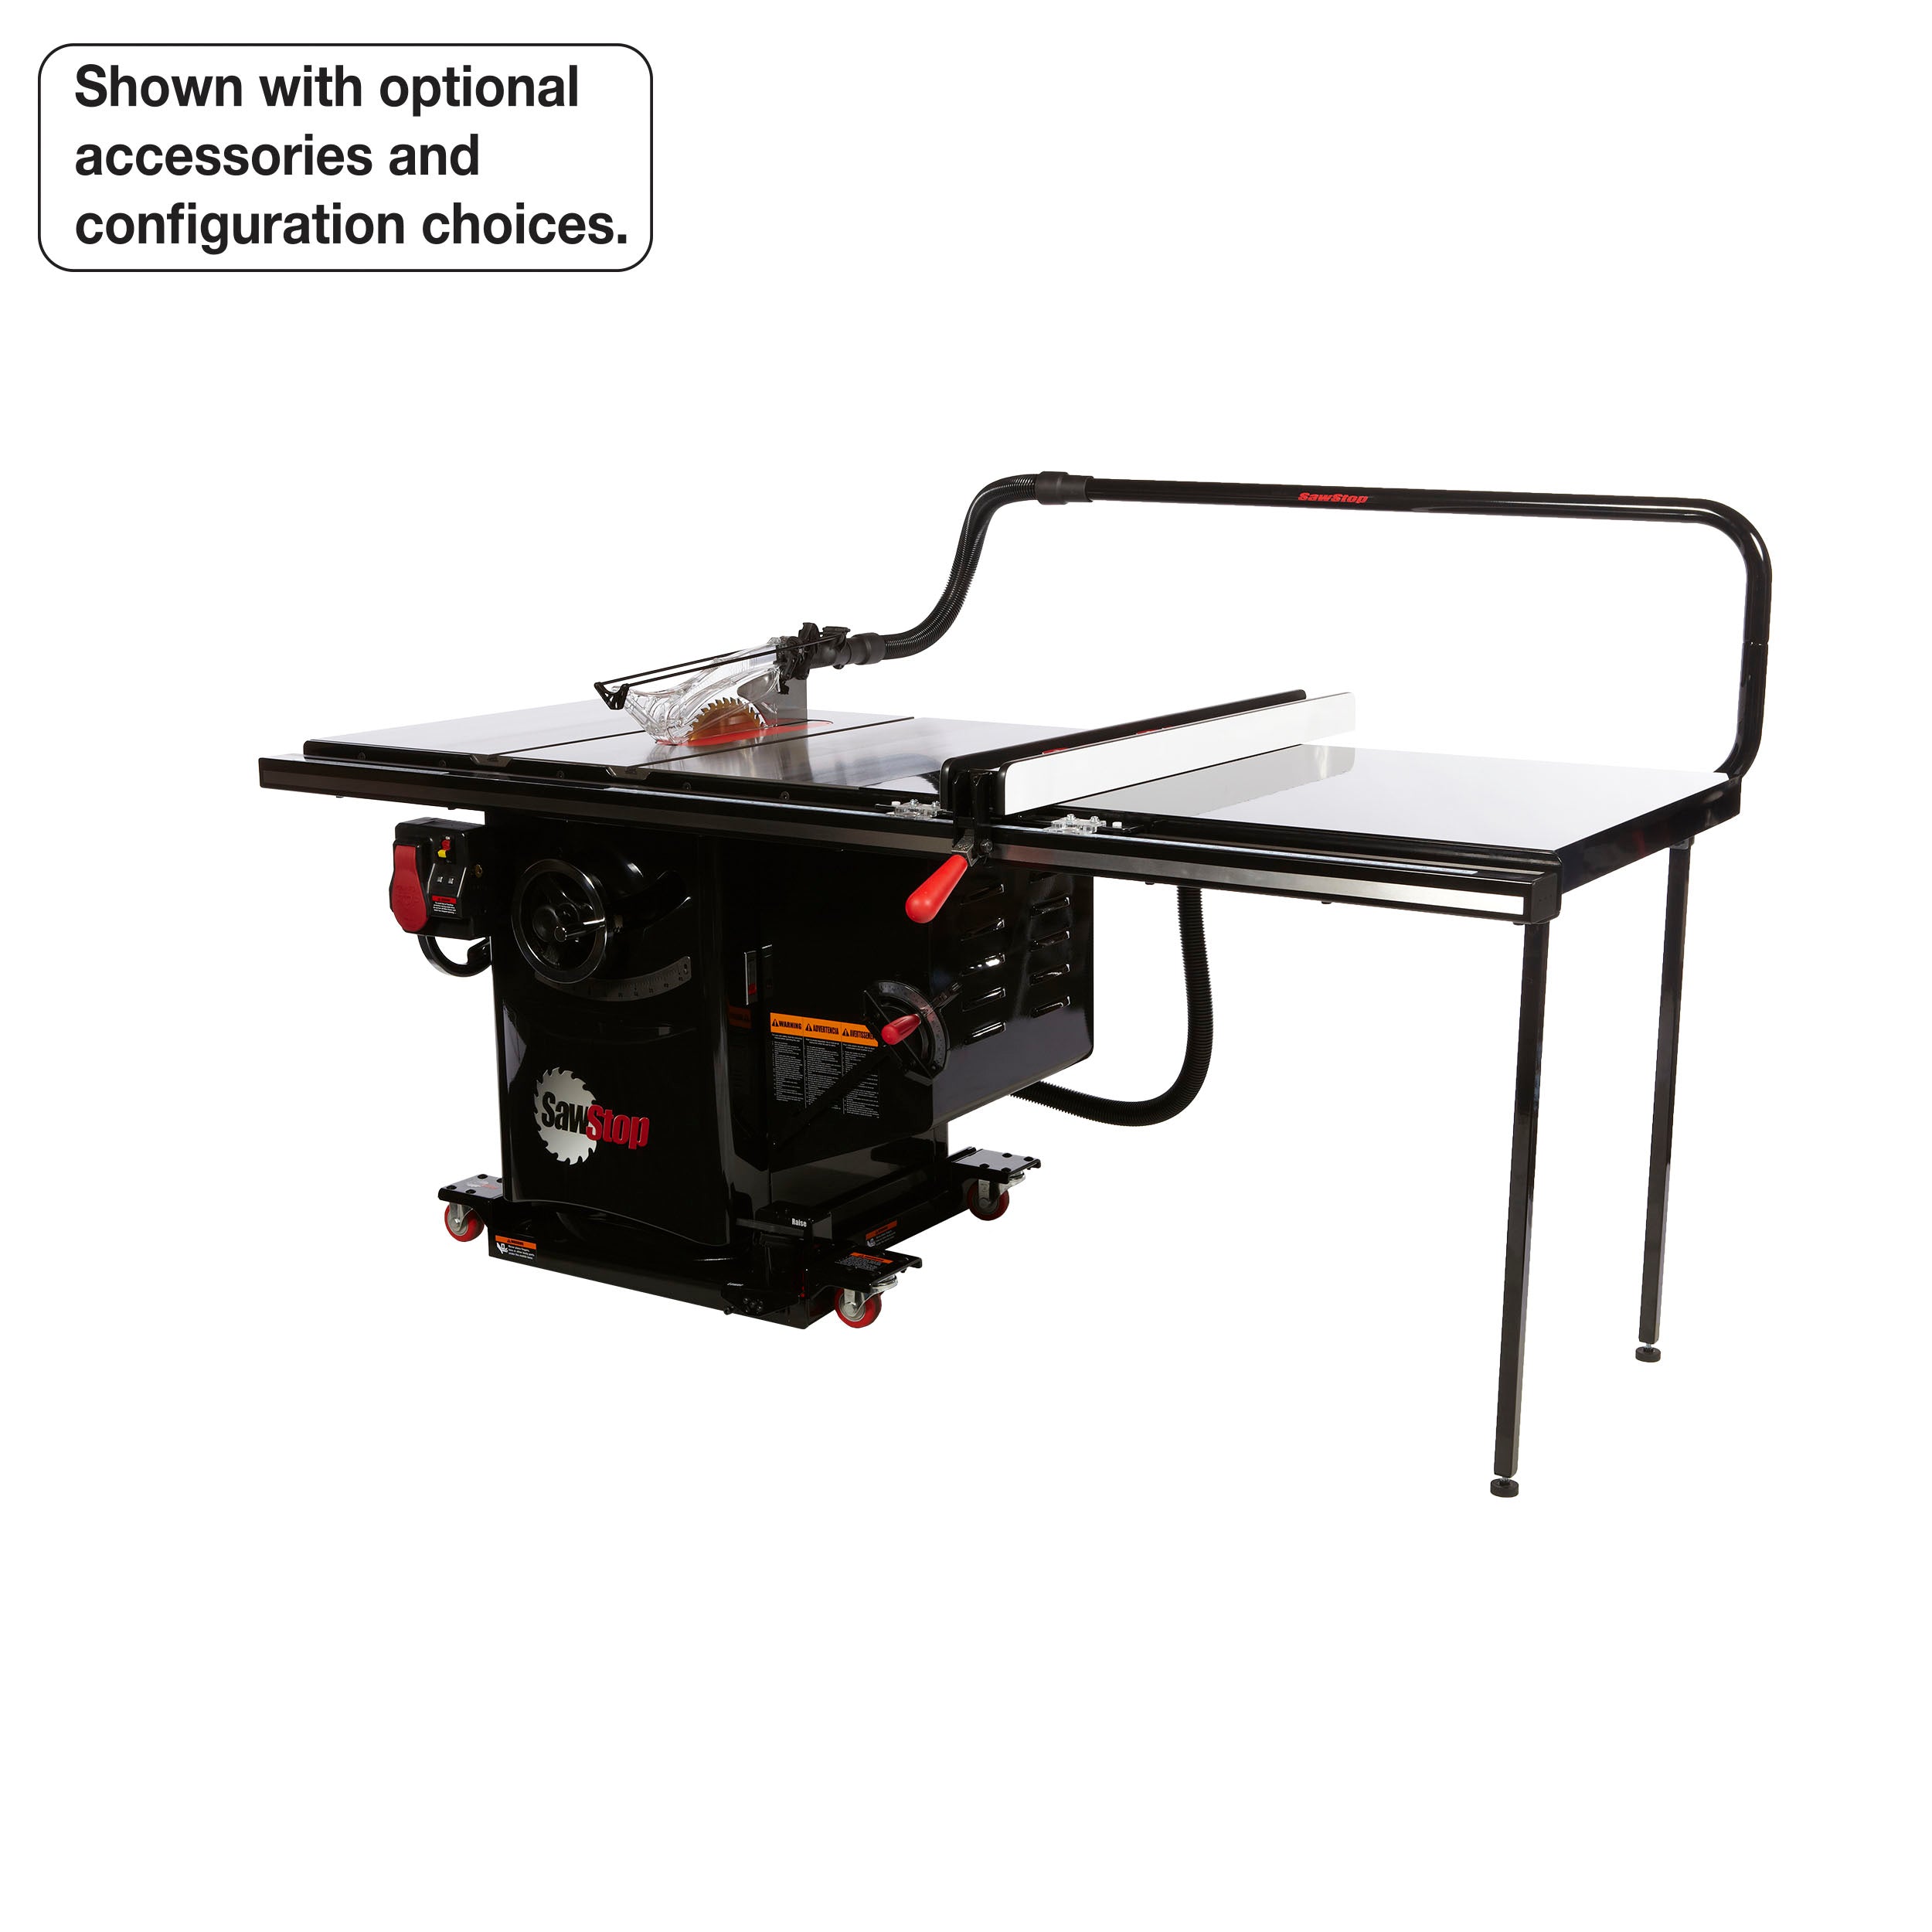 SawStop 7.5HP, 3ph, 480v Industrial Cabinet Saw w/ 52